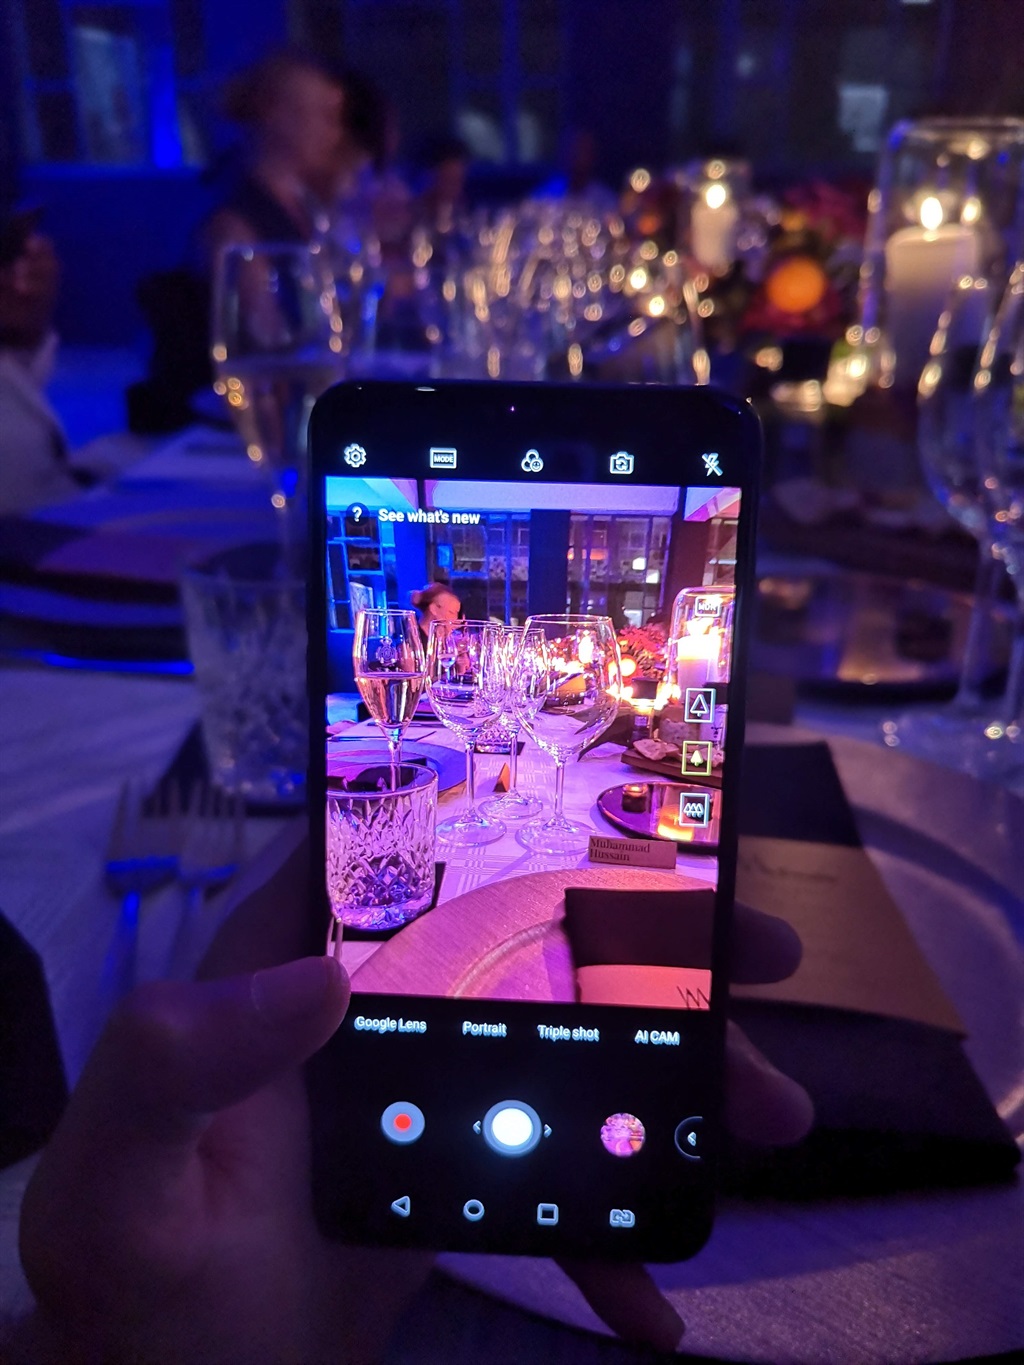 The first look at the camera hub within the LG V40ThinQ, it has five cameras and host of modes and functionality. Pictures: Muhammad Hussain